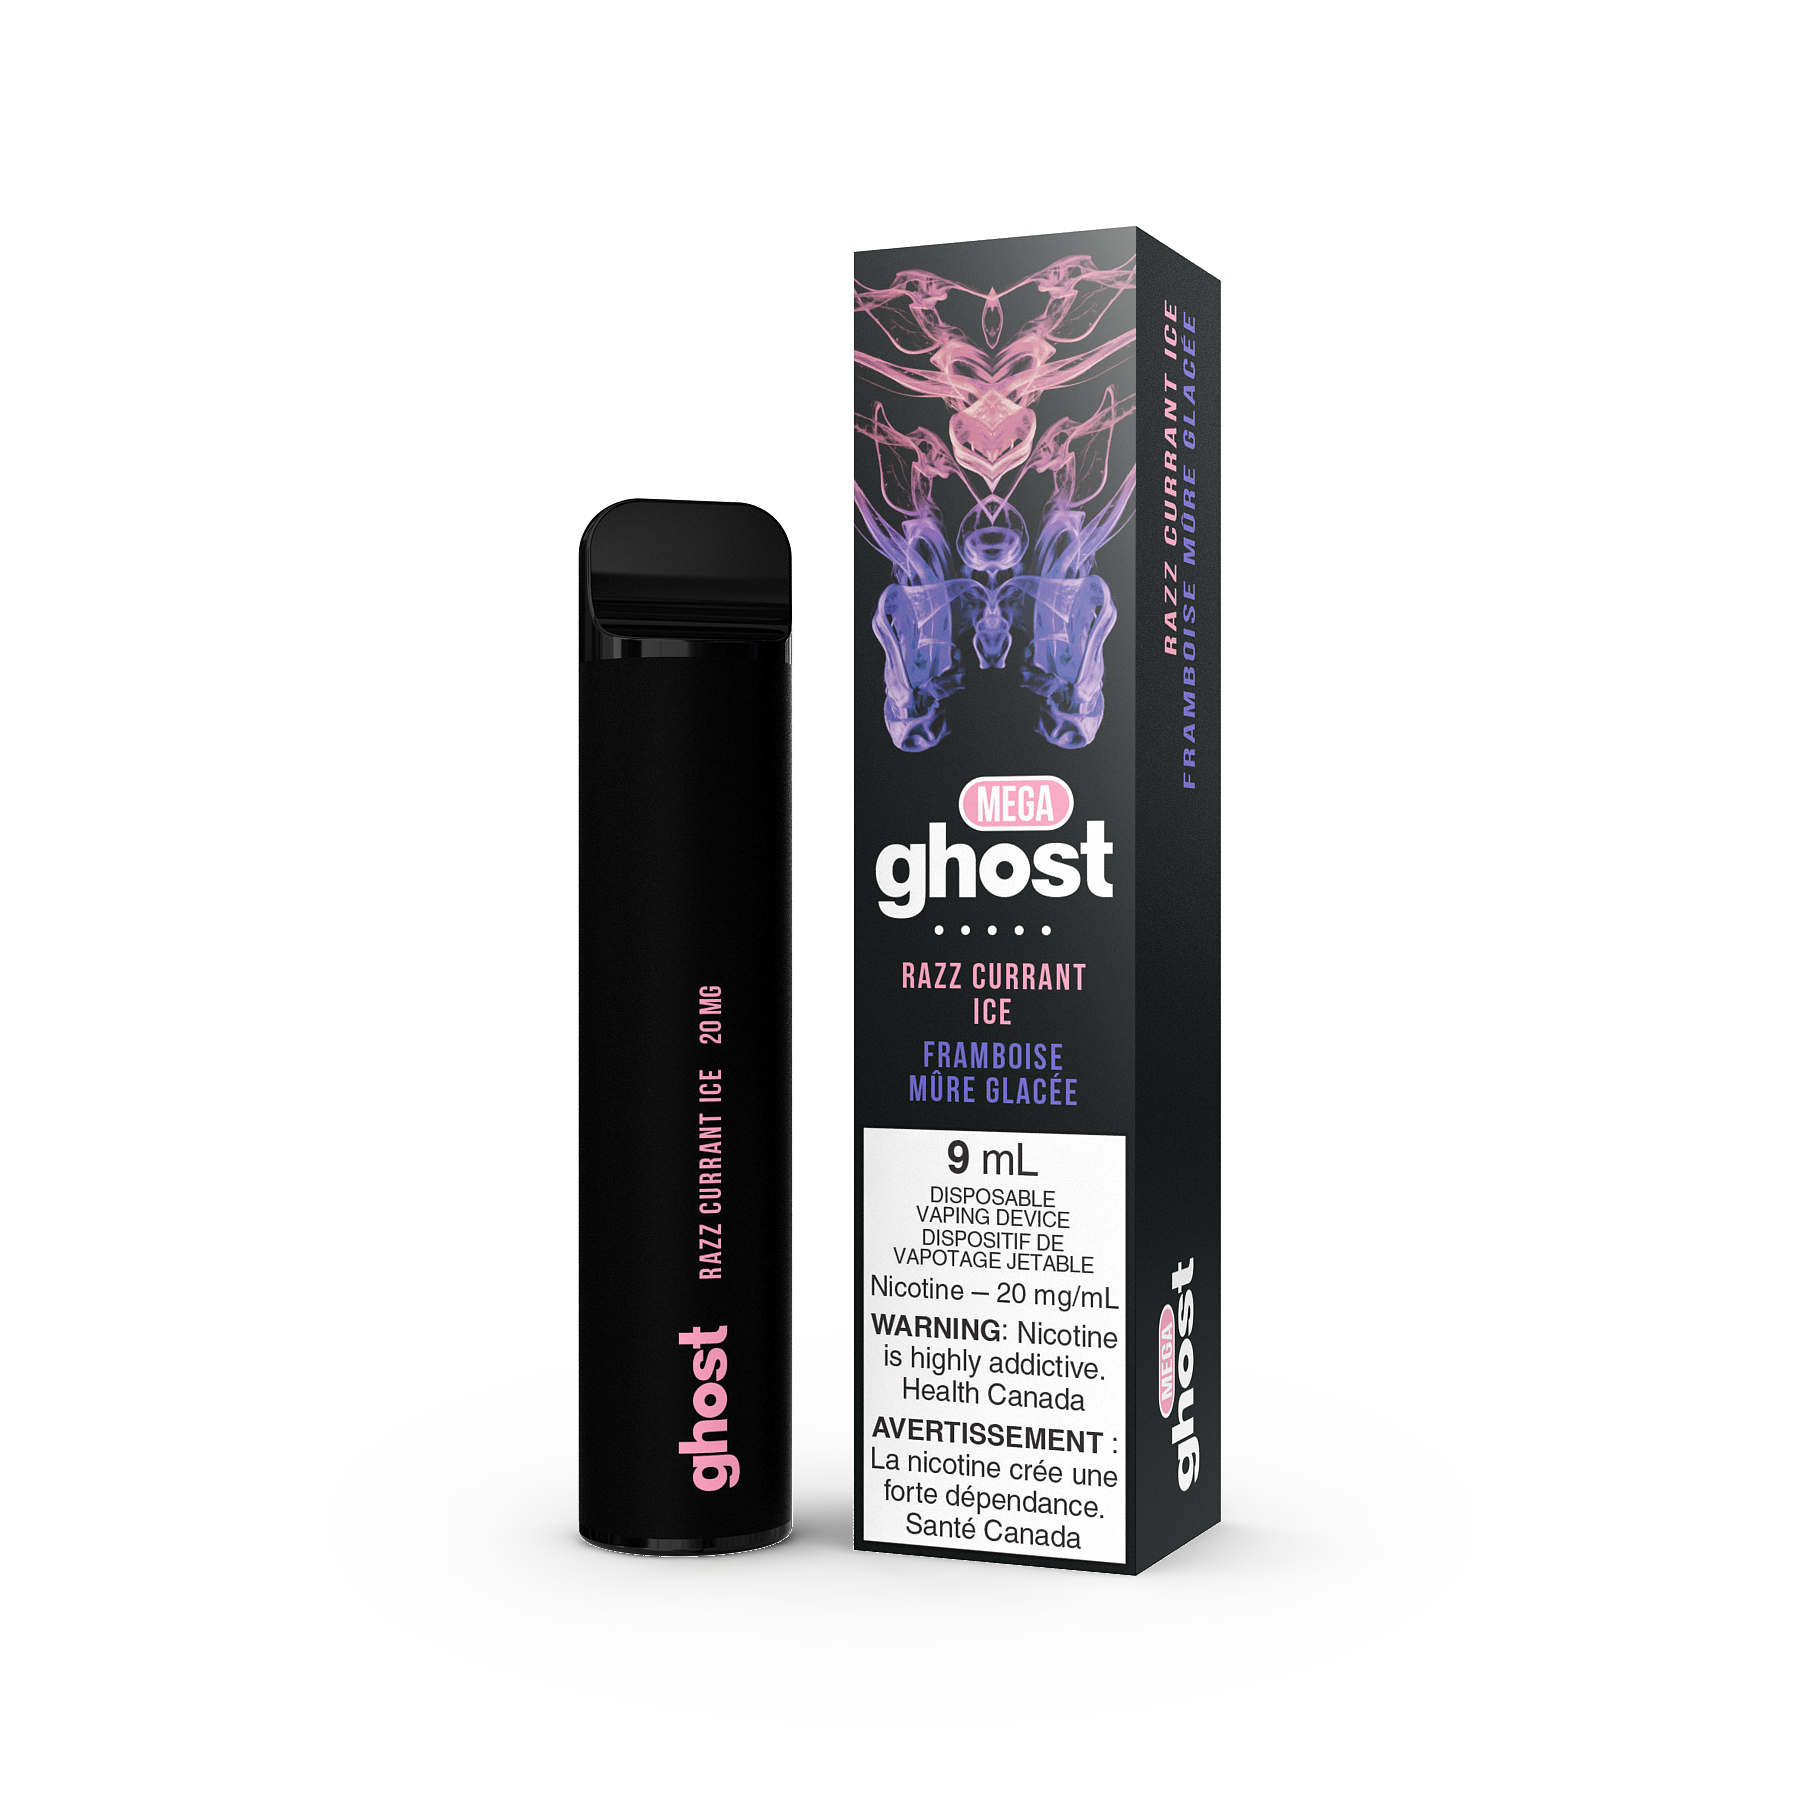 Ghost Mega 3000 Puffs Disposable Razz Currant Ice